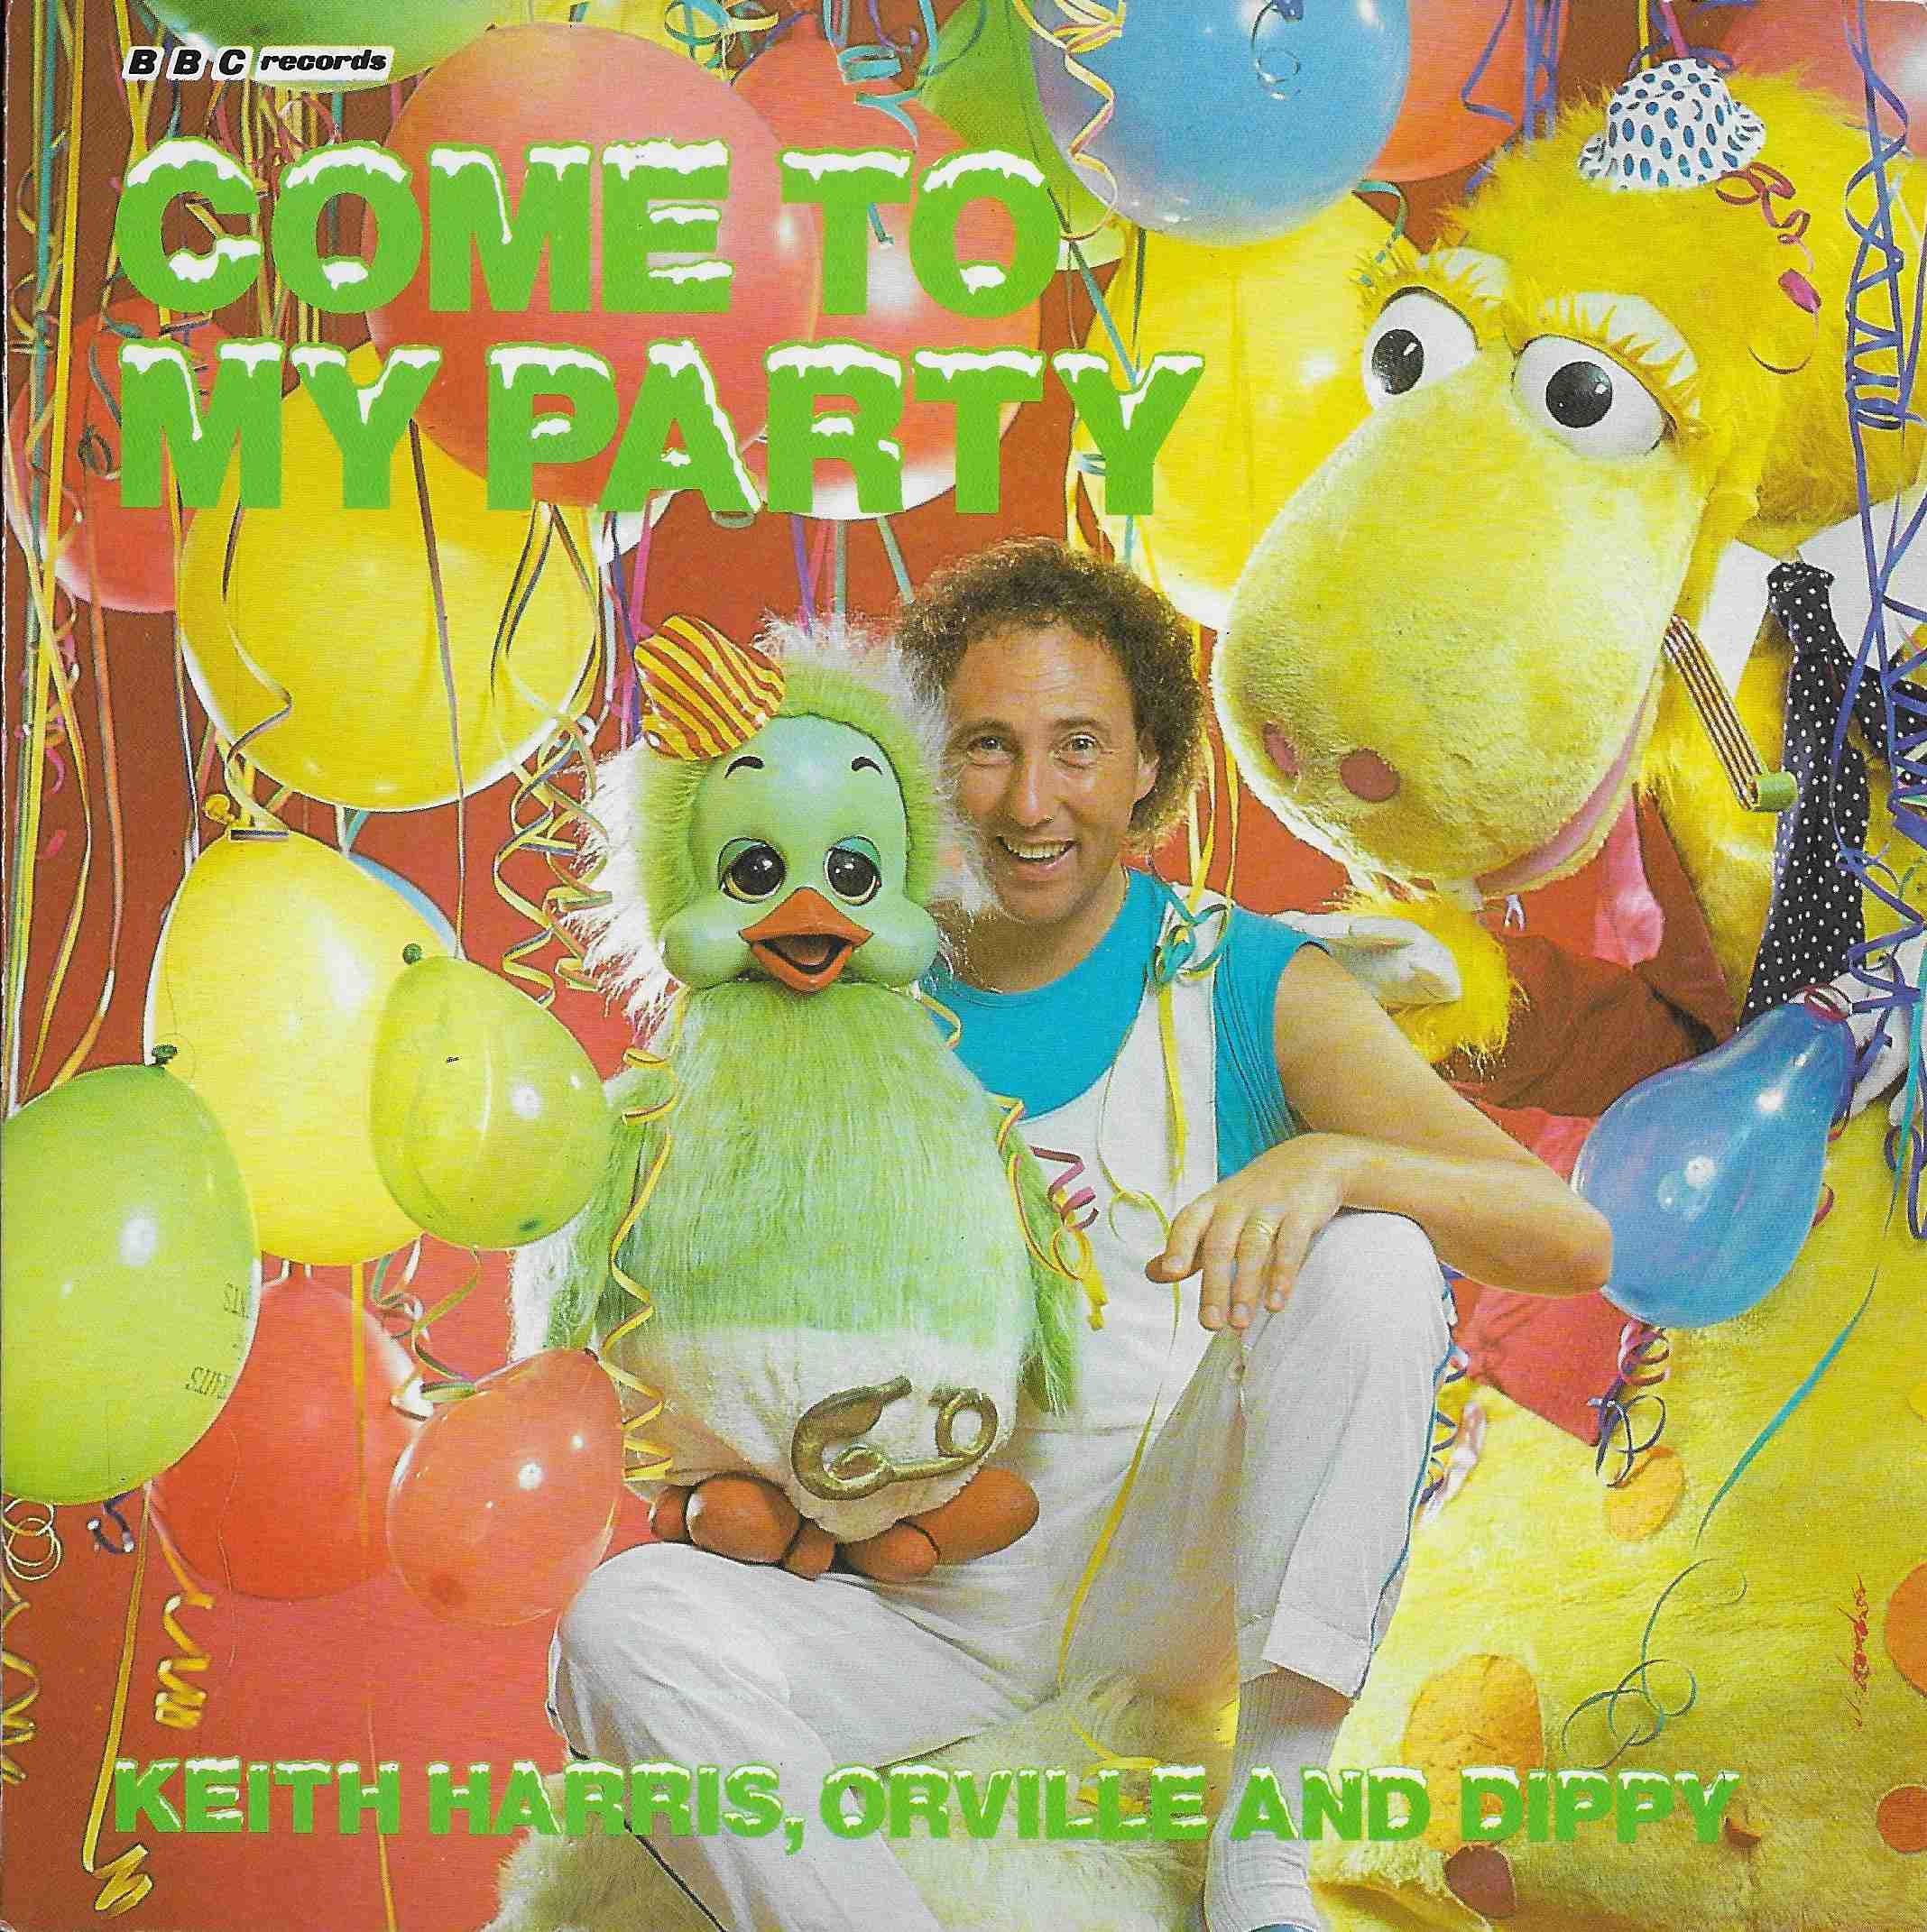 Picture of RESL 138 Come to my party by artist Keith Harris, Orville and Dippy / Keith Harris and Orville from the BBC records and Tapes library